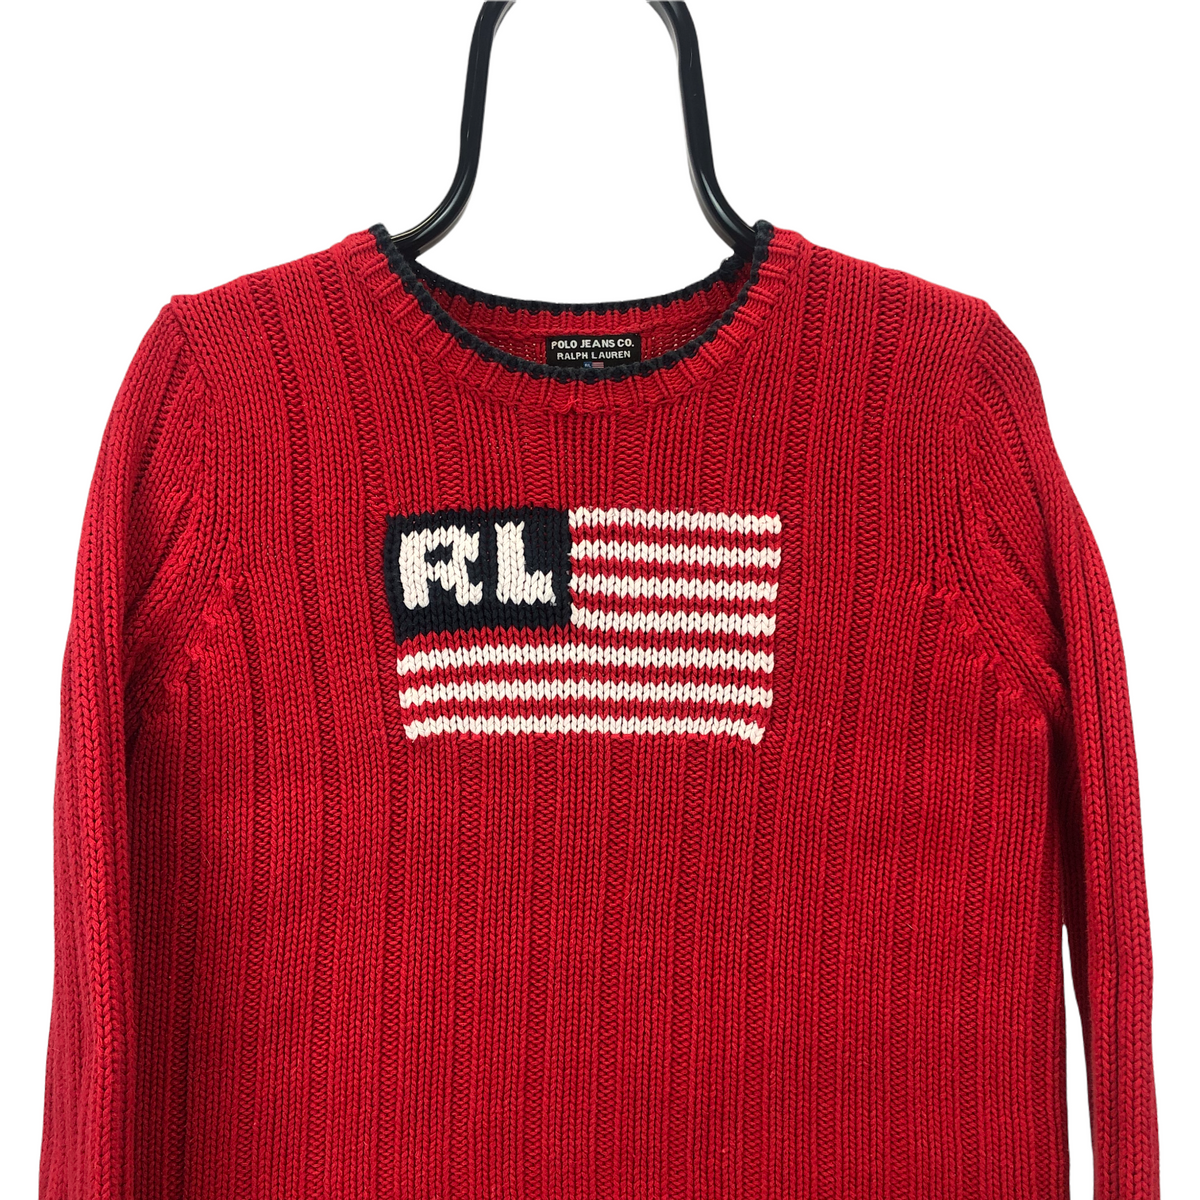 VINTAGE 90S POLO RALPH LAUREN KNITTED SWEATER - MEN'S XS/WOMEN'S SMALL -  Vintique Clothing